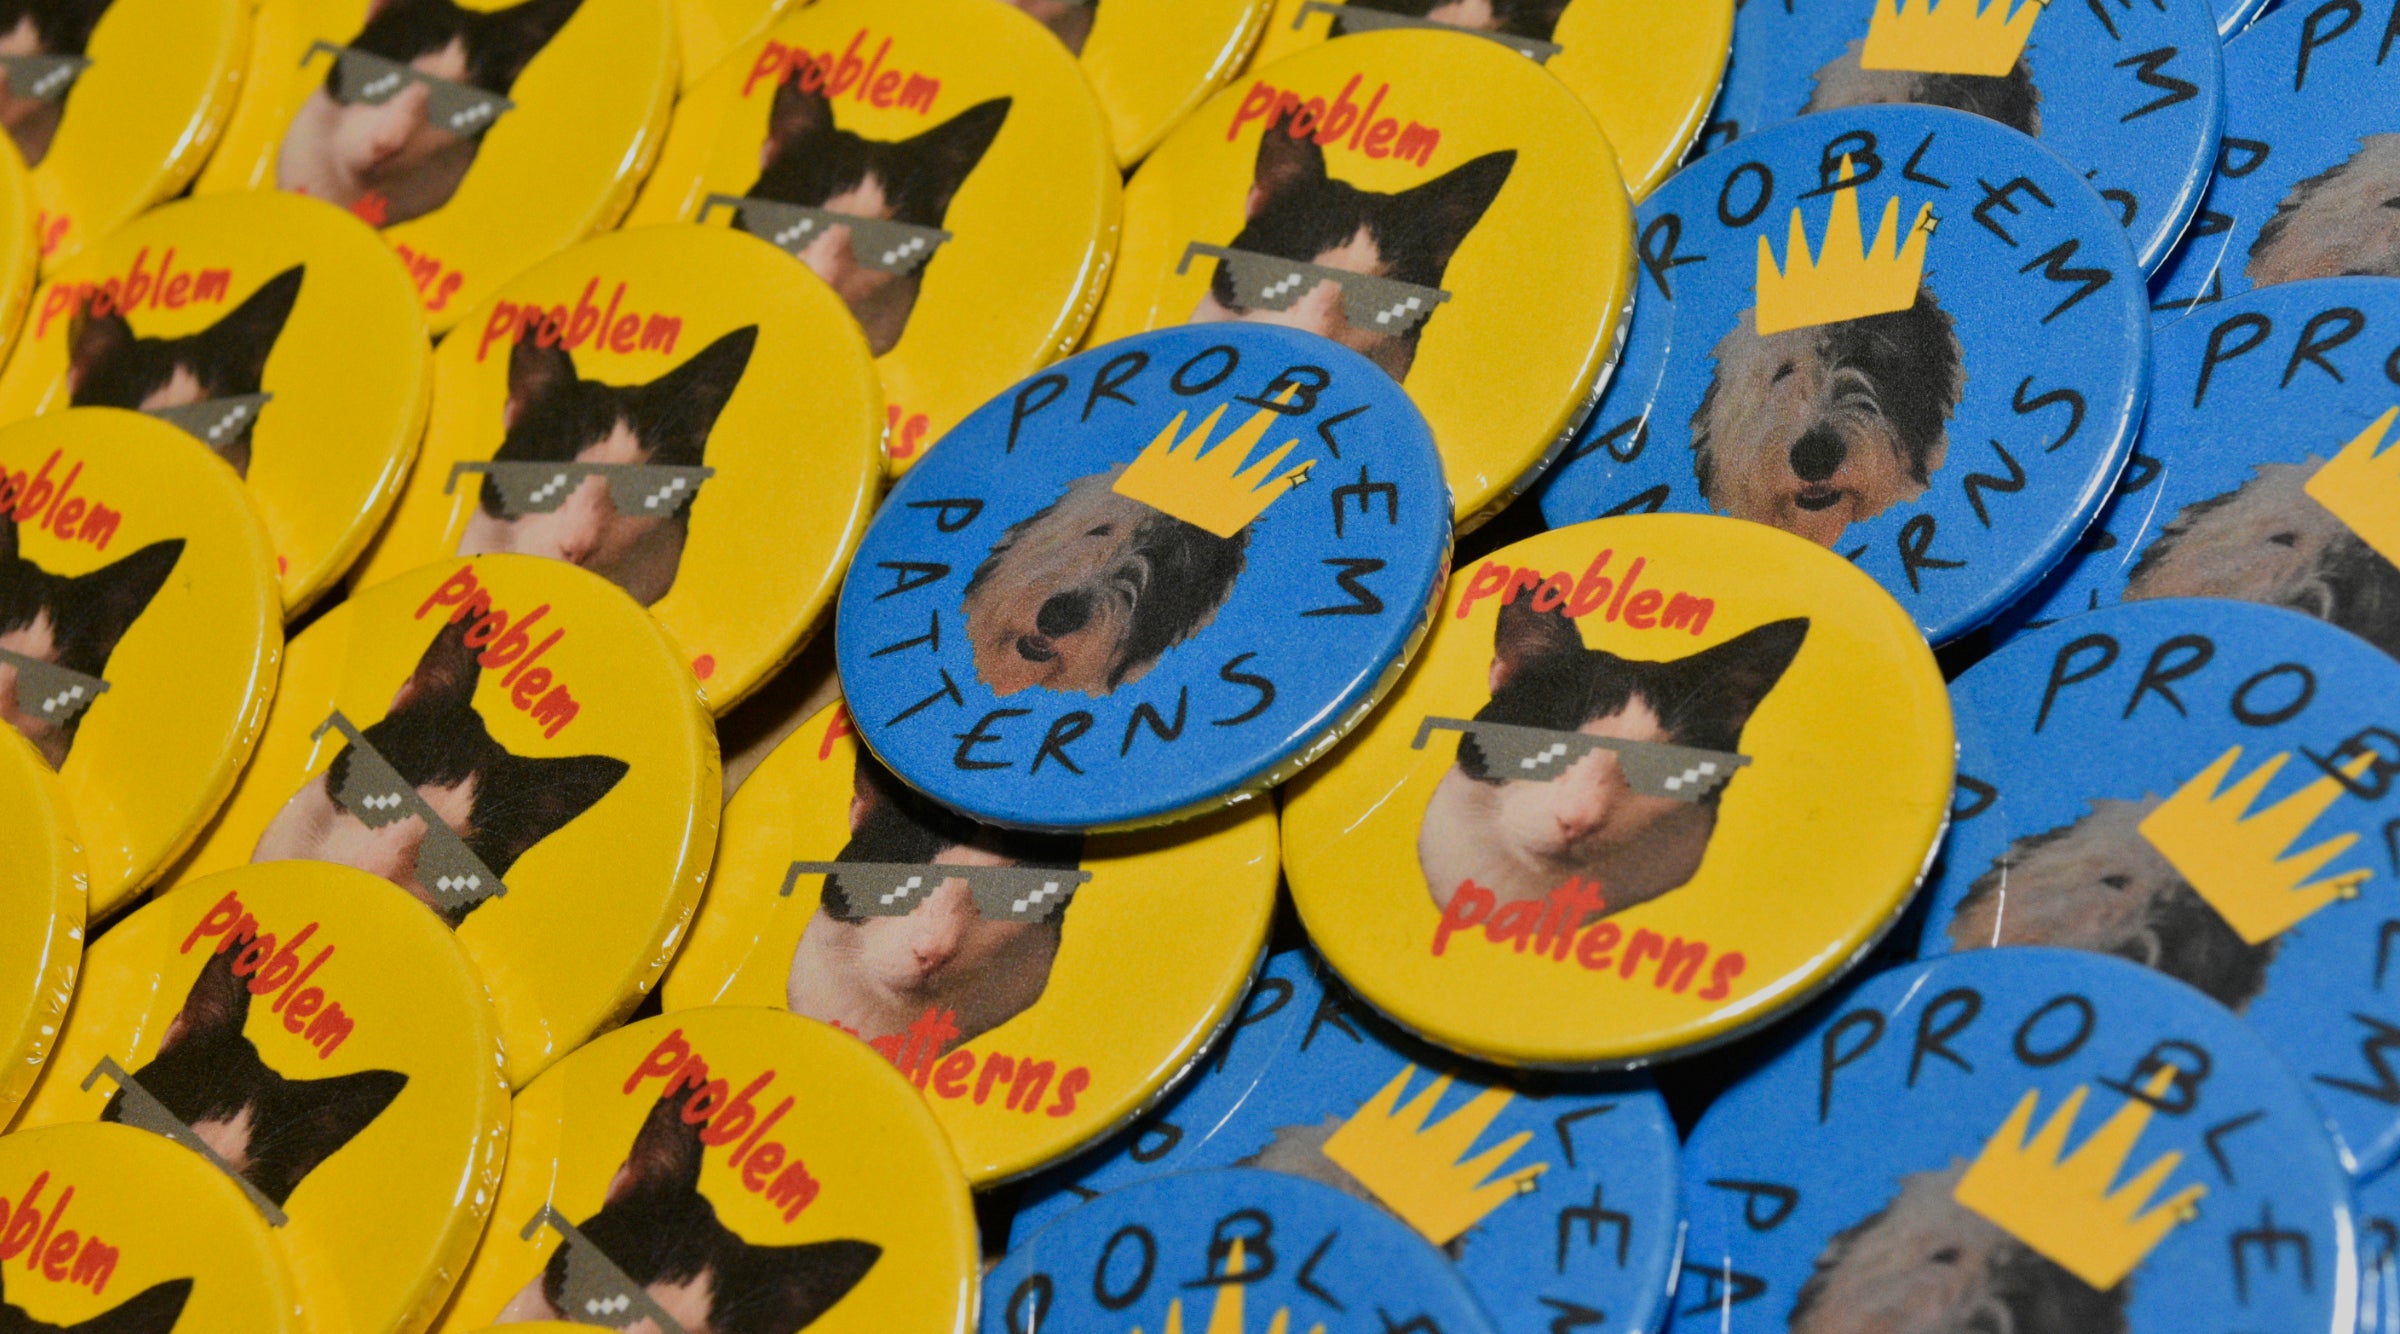 A large pile of badges for the band Problem Patterns in two designs. One design features a yellow background and a black and white cat wearing sunglasses with red text reading "Problem Patterns". The other features a blue background and a black and white old English sheepdog wearing a yellow crown with black text in a circle reading "Problem Patterns".